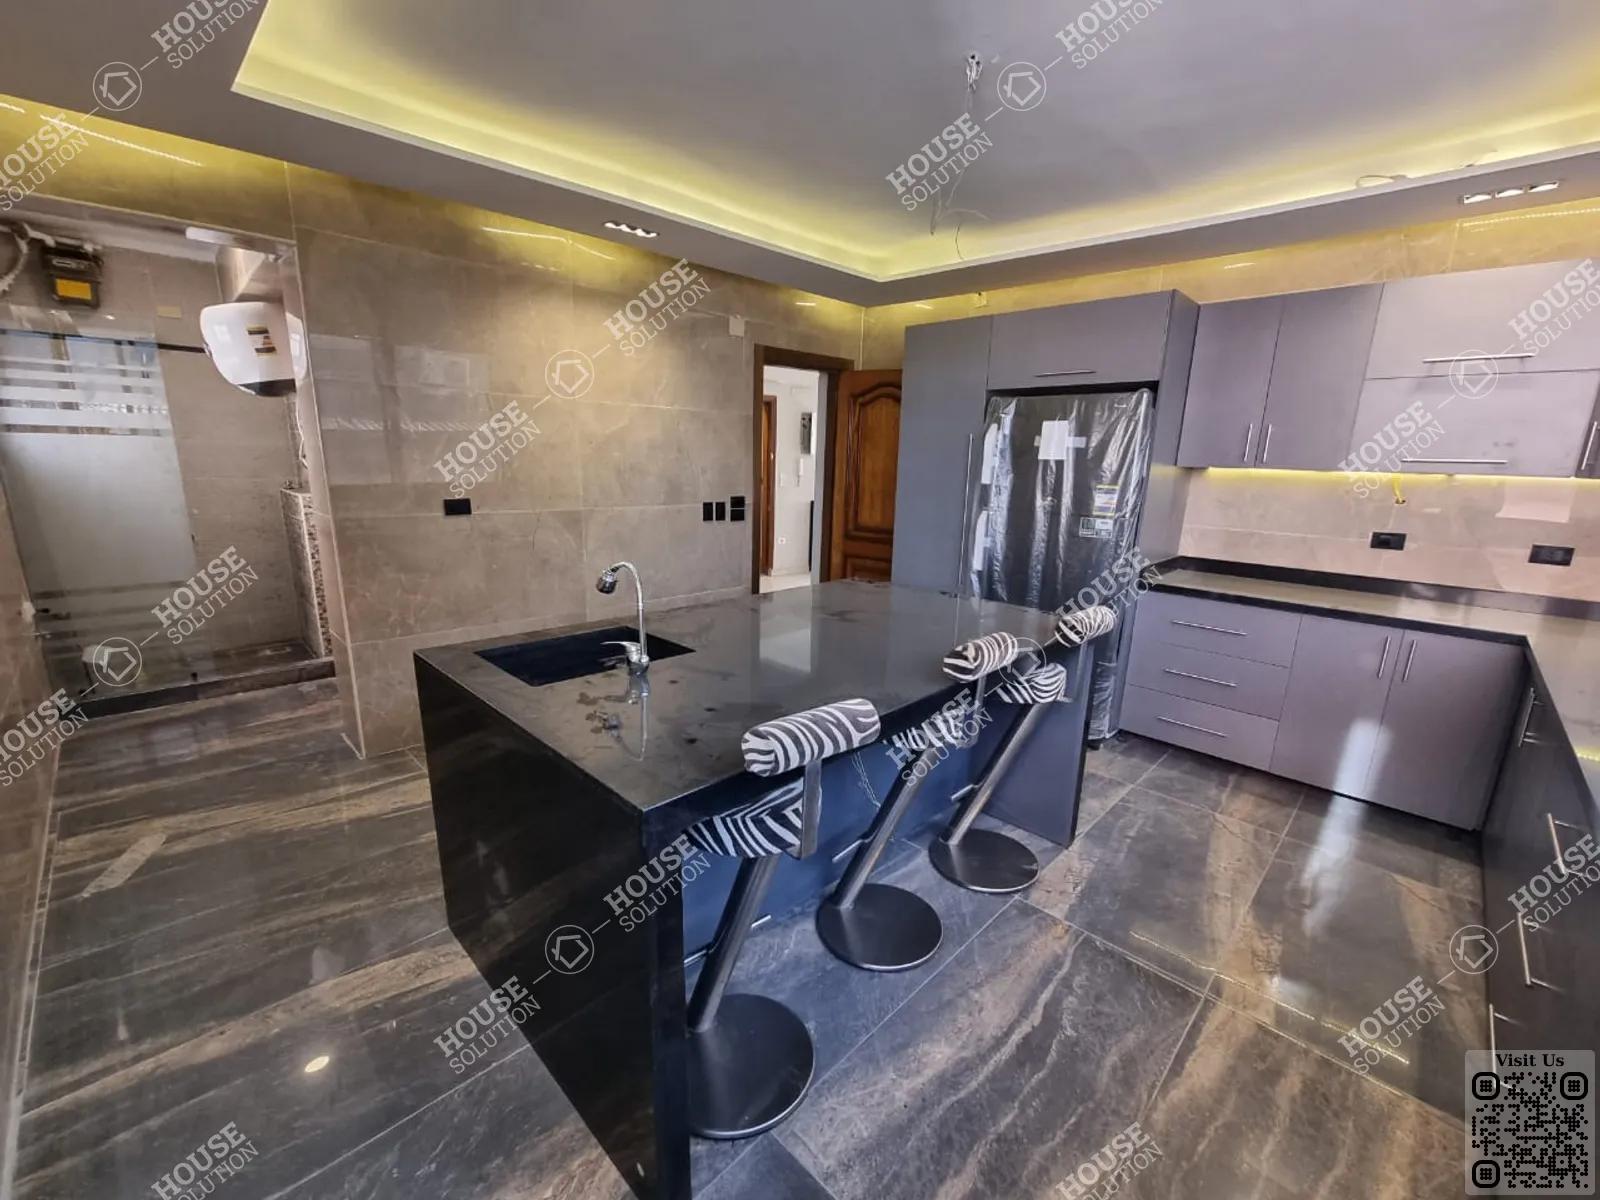 KITCHEN  @ Penthouses For Rent In Maadi Maadi Degla Area: 250 m² consists of 3 Bedrooms 3 Bathrooms Modern furnished 5 stars #4898-1